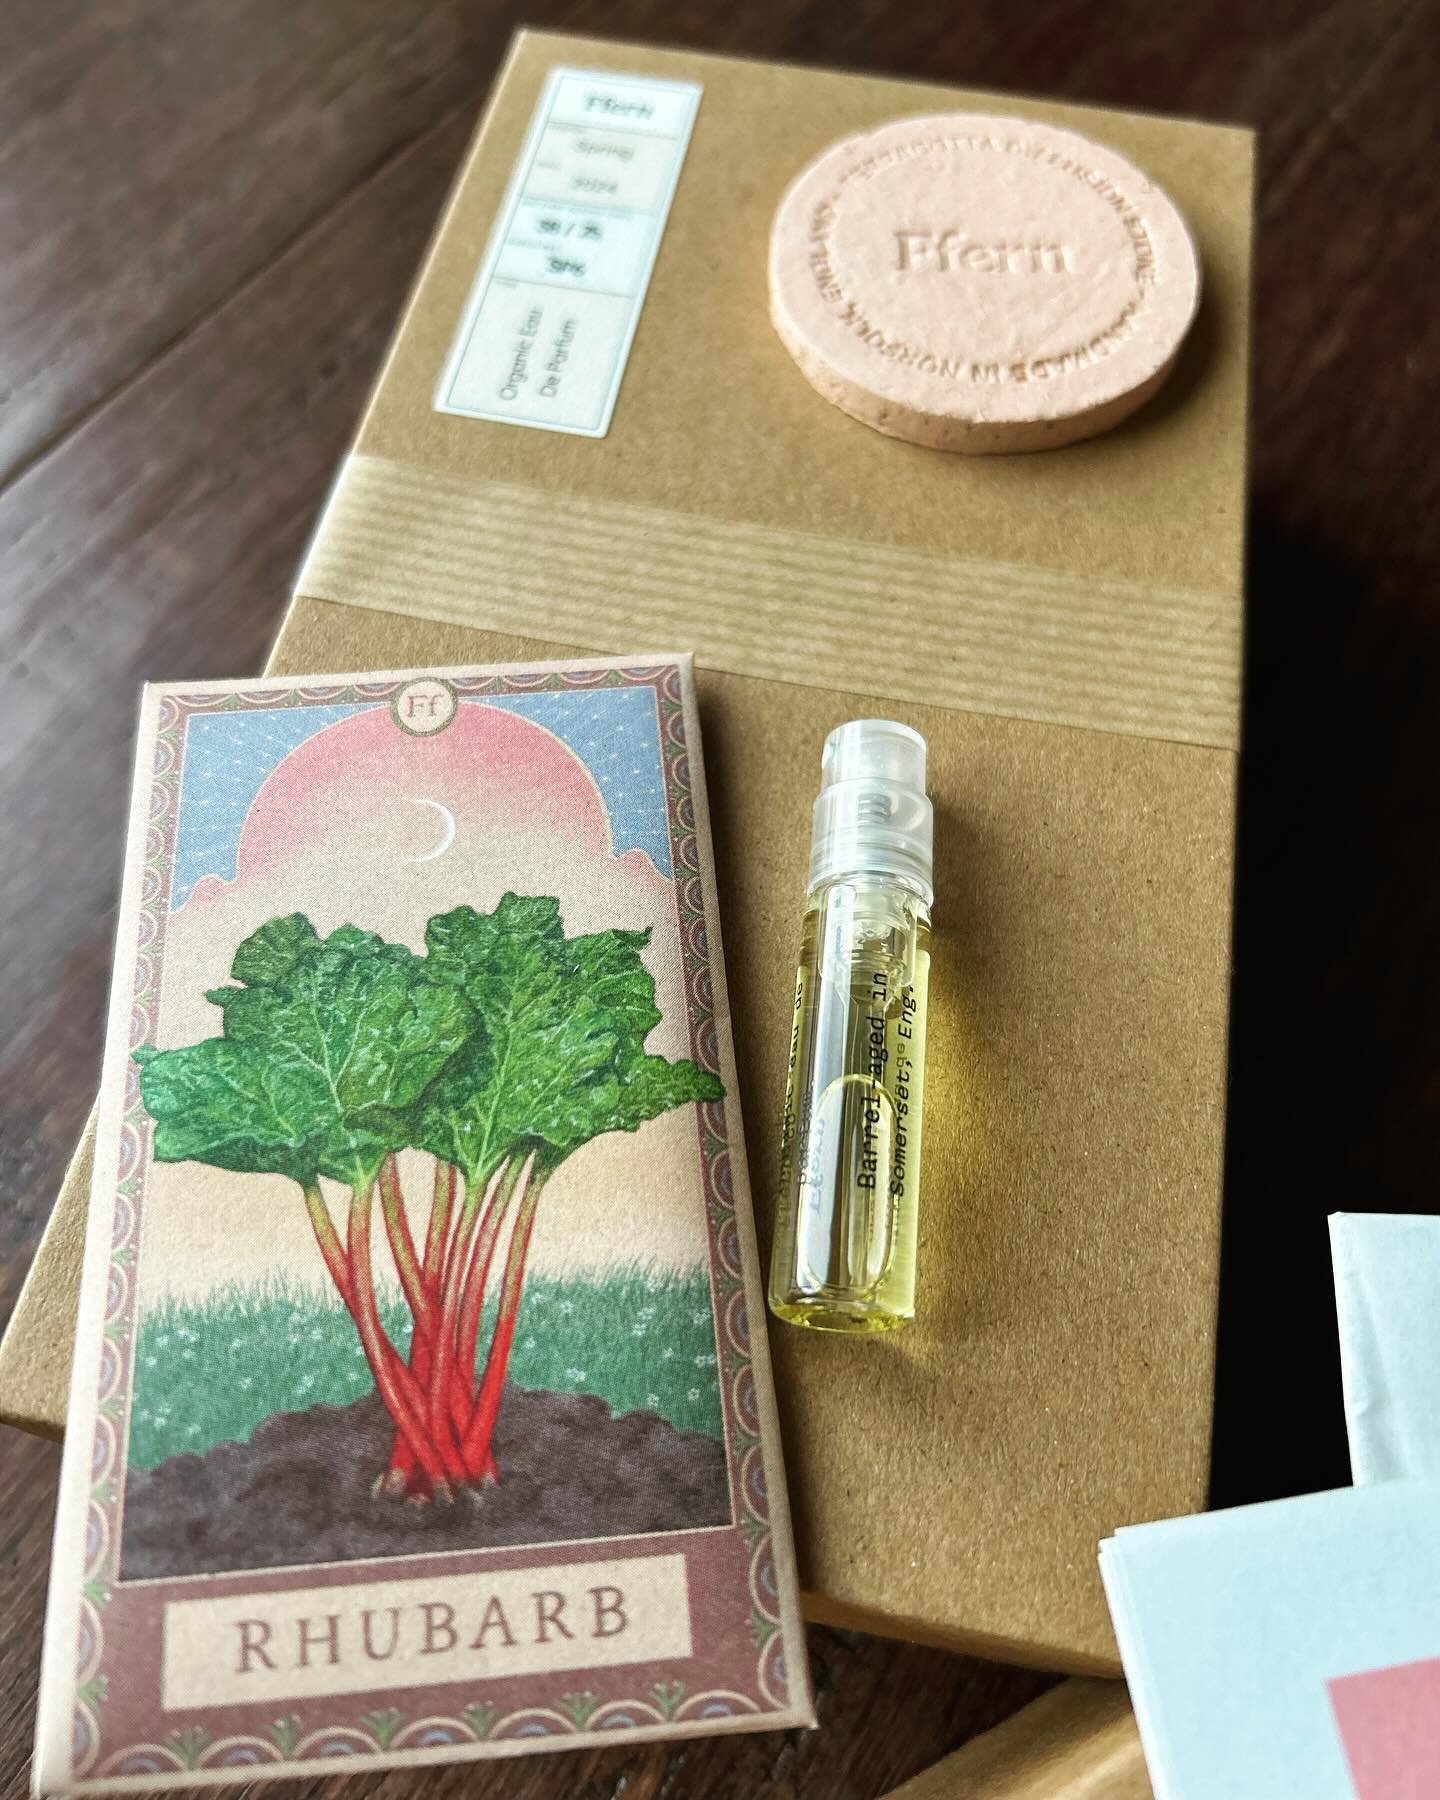 I love perfumes, so when I found out about @ffern.co a small-batch, members-only perfume club with quarterly perfume releases, I got right on the waiting list. I finally got my first shipment, their summer 2024 scent - Rhubarb and it is delicious. Hi